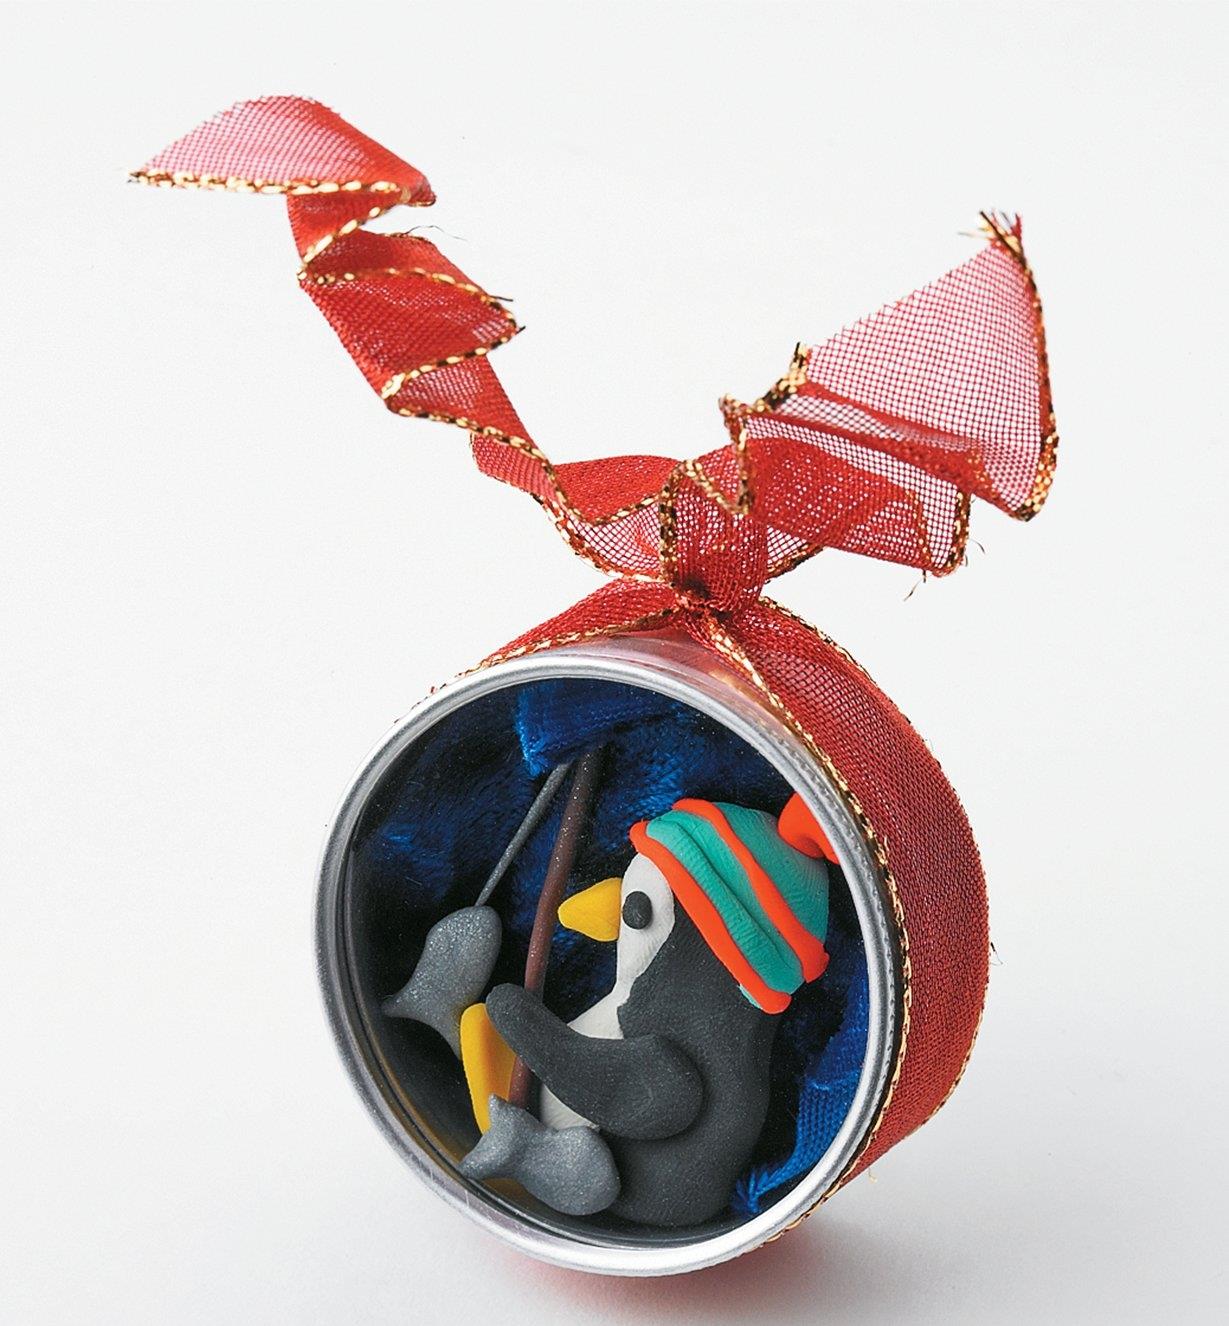 A holiday ornament made with a polymer clay penguin inside a Watchmaker's Case